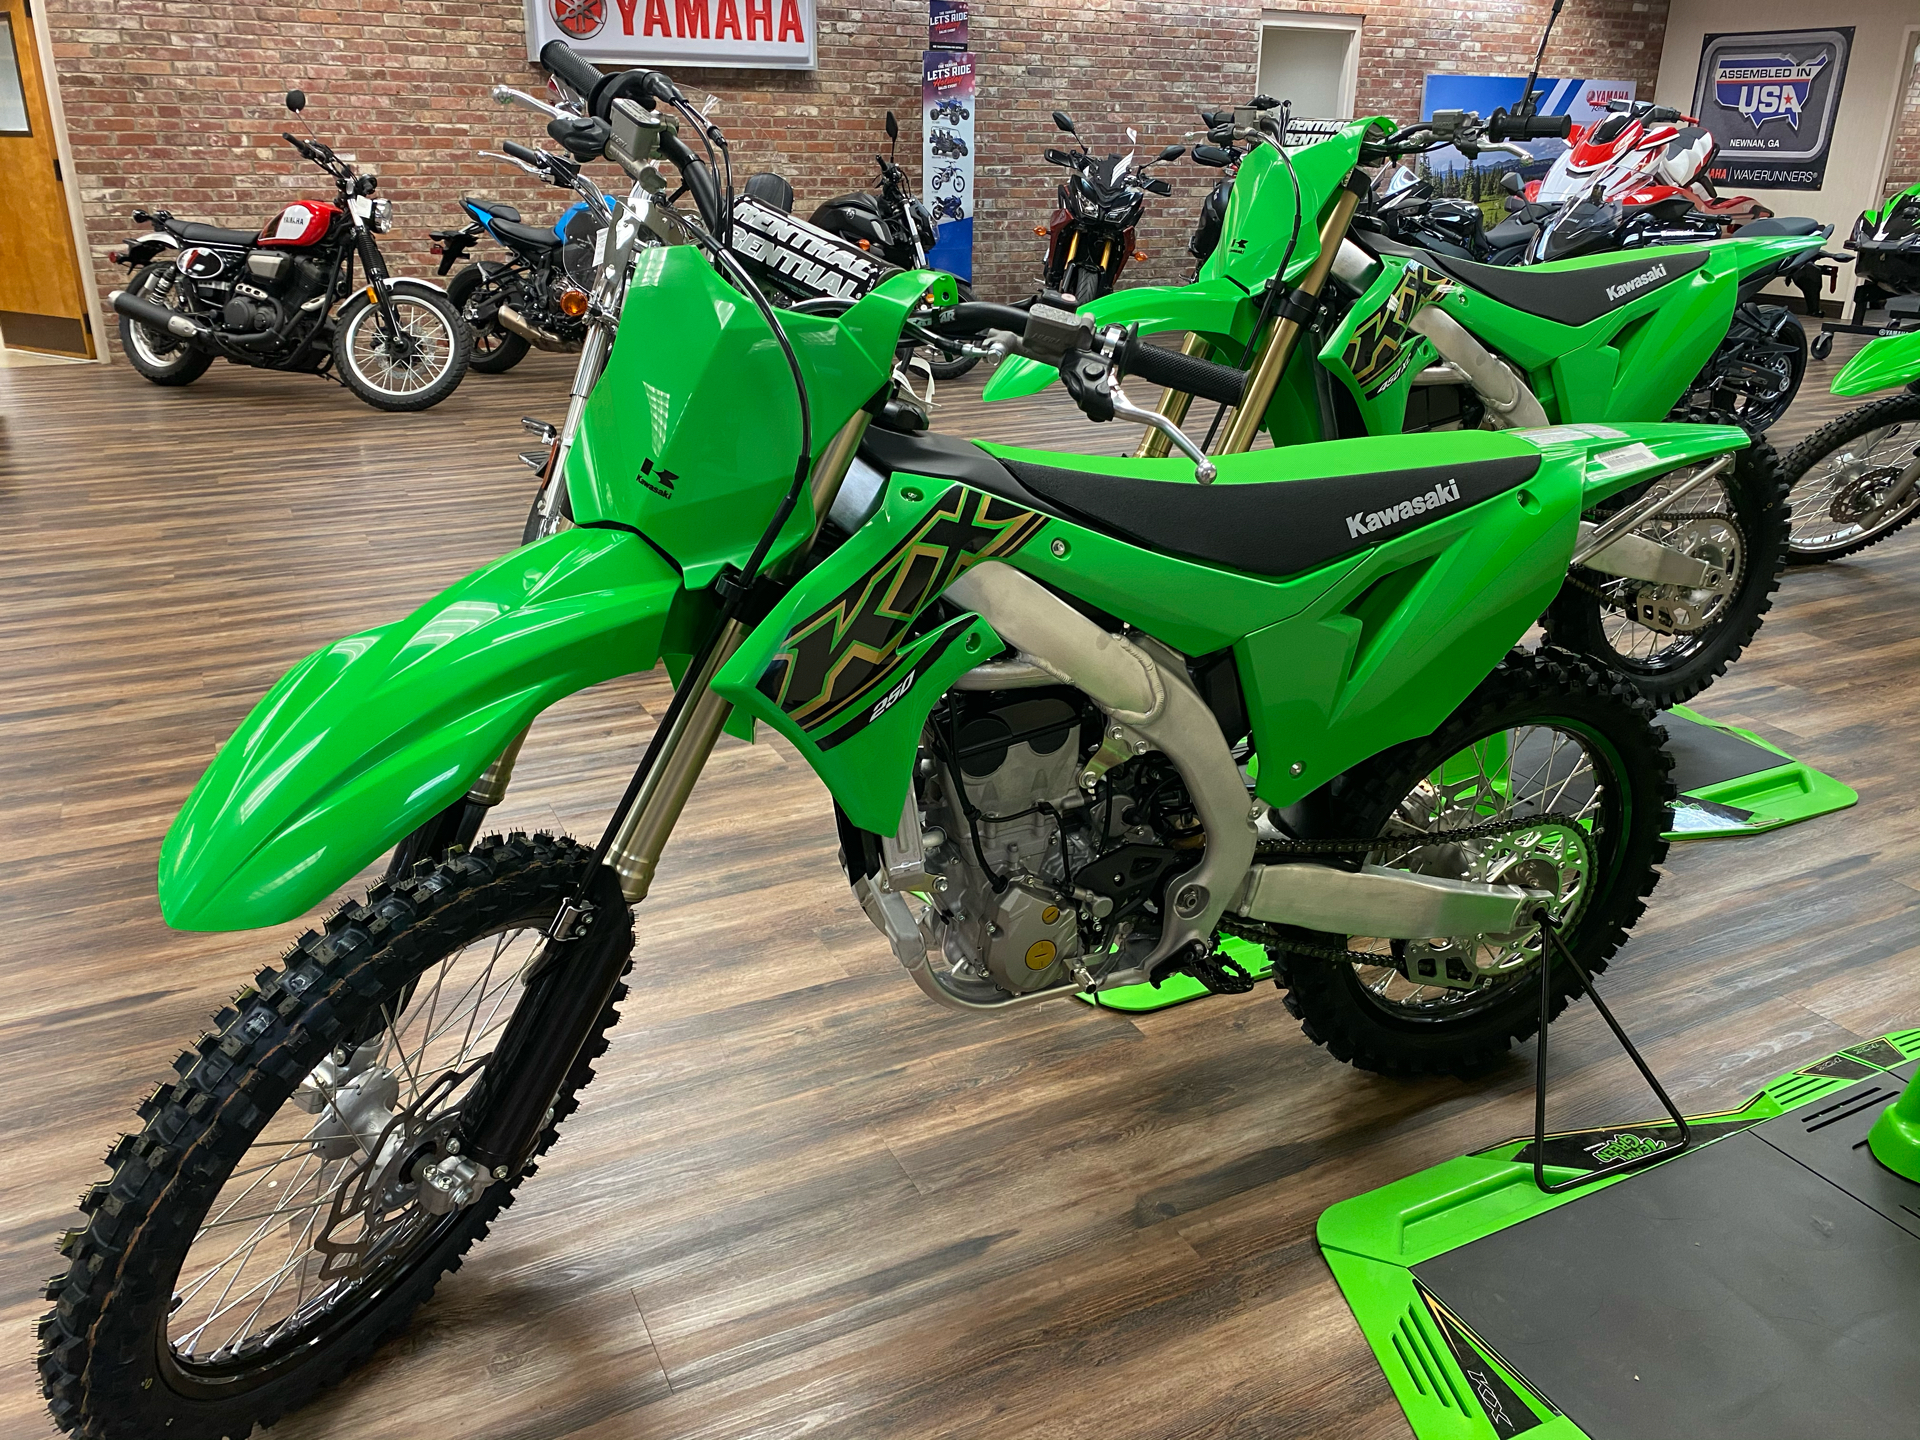 New 2021 Kawasaki KX 250 Motorcycles in Statesville, NC Stock Number: -